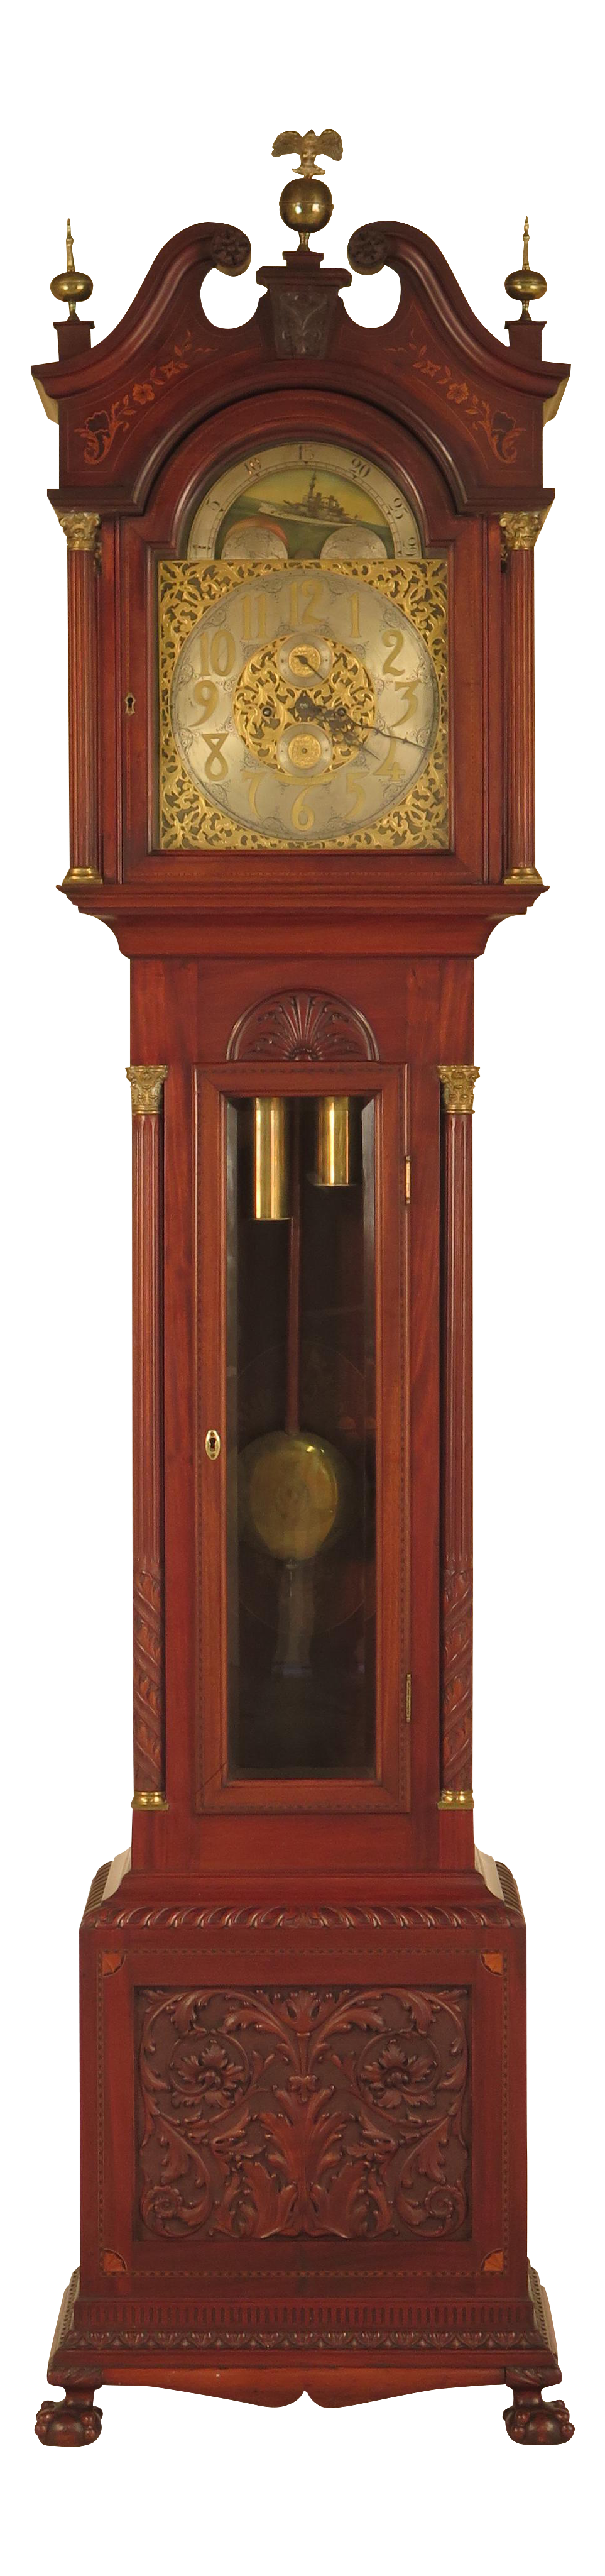 Grandfather Clock Picture Download Free Image PNG Image